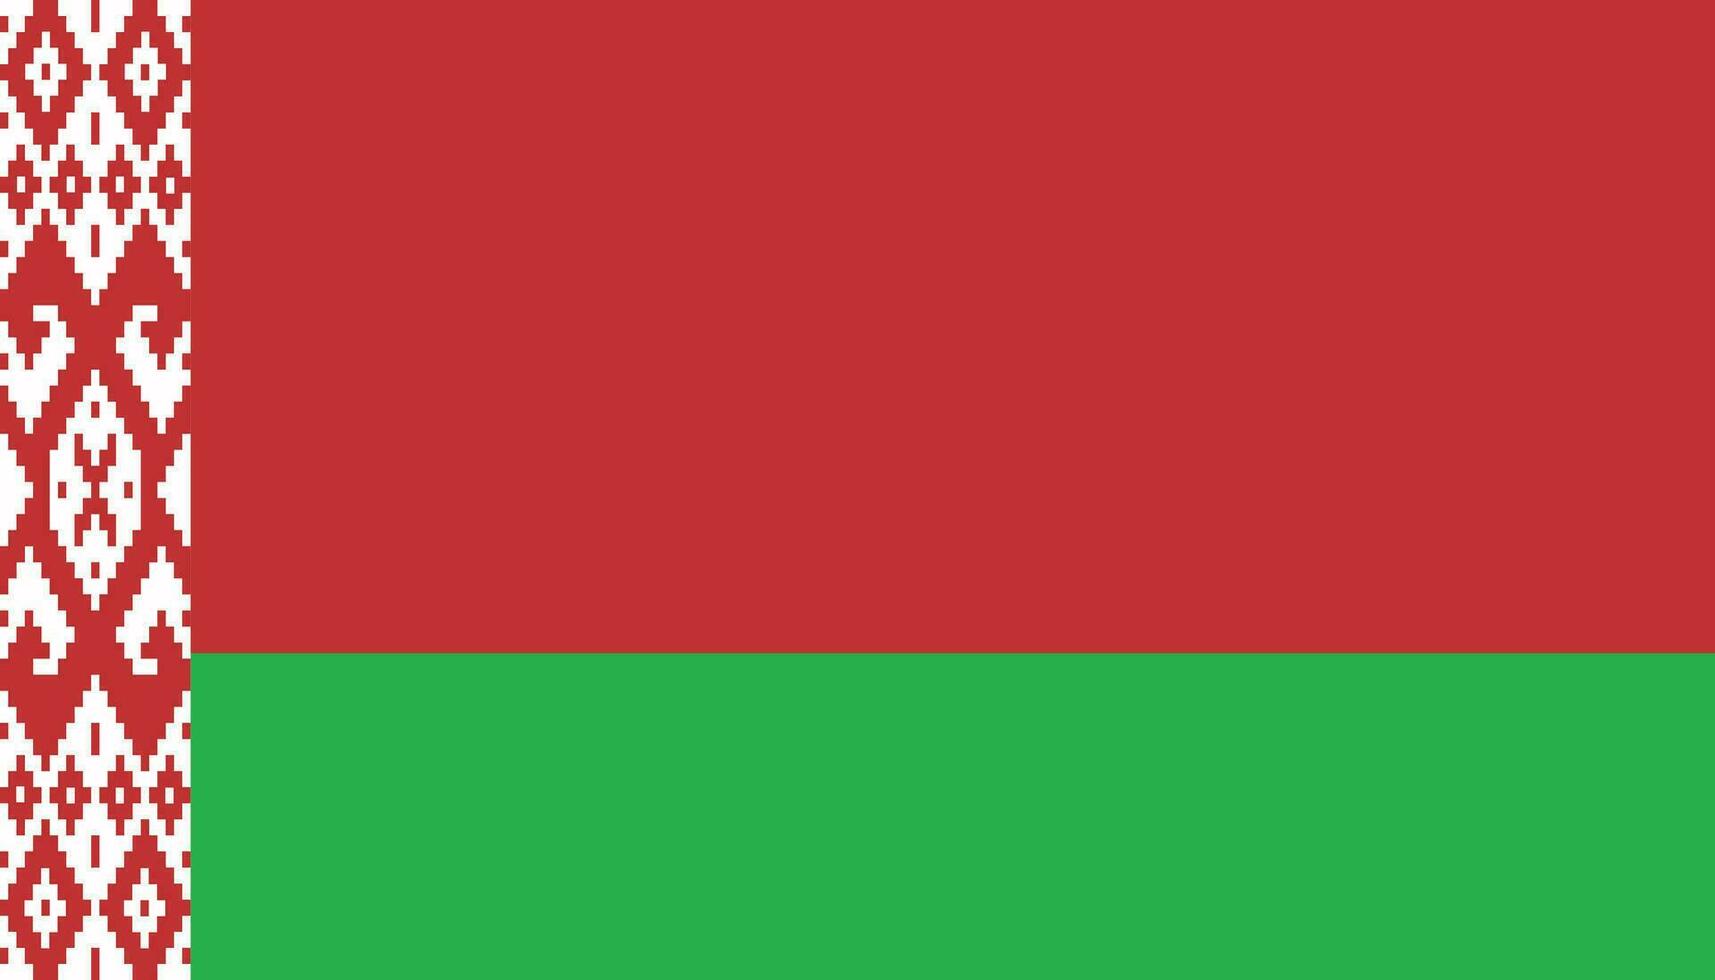 Belarus flag icon in flat style. National sign vector illustration. Politic business concept.